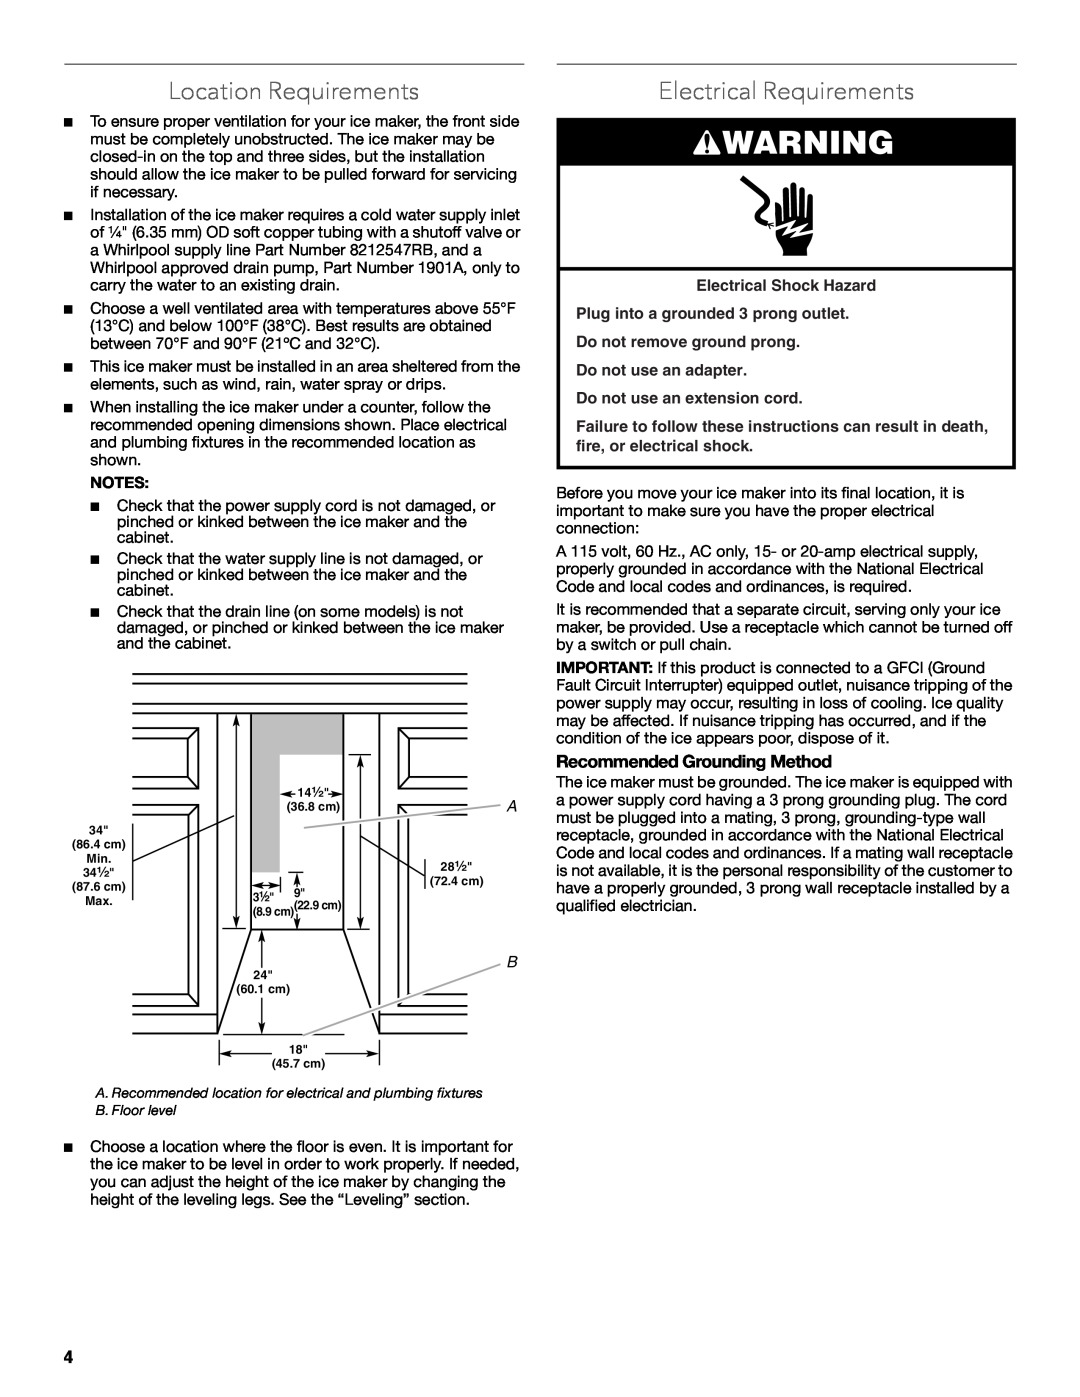 KitchenAid W10515677C manual Location Requirements, Electrical Requirements, Recommended Grounding Method 